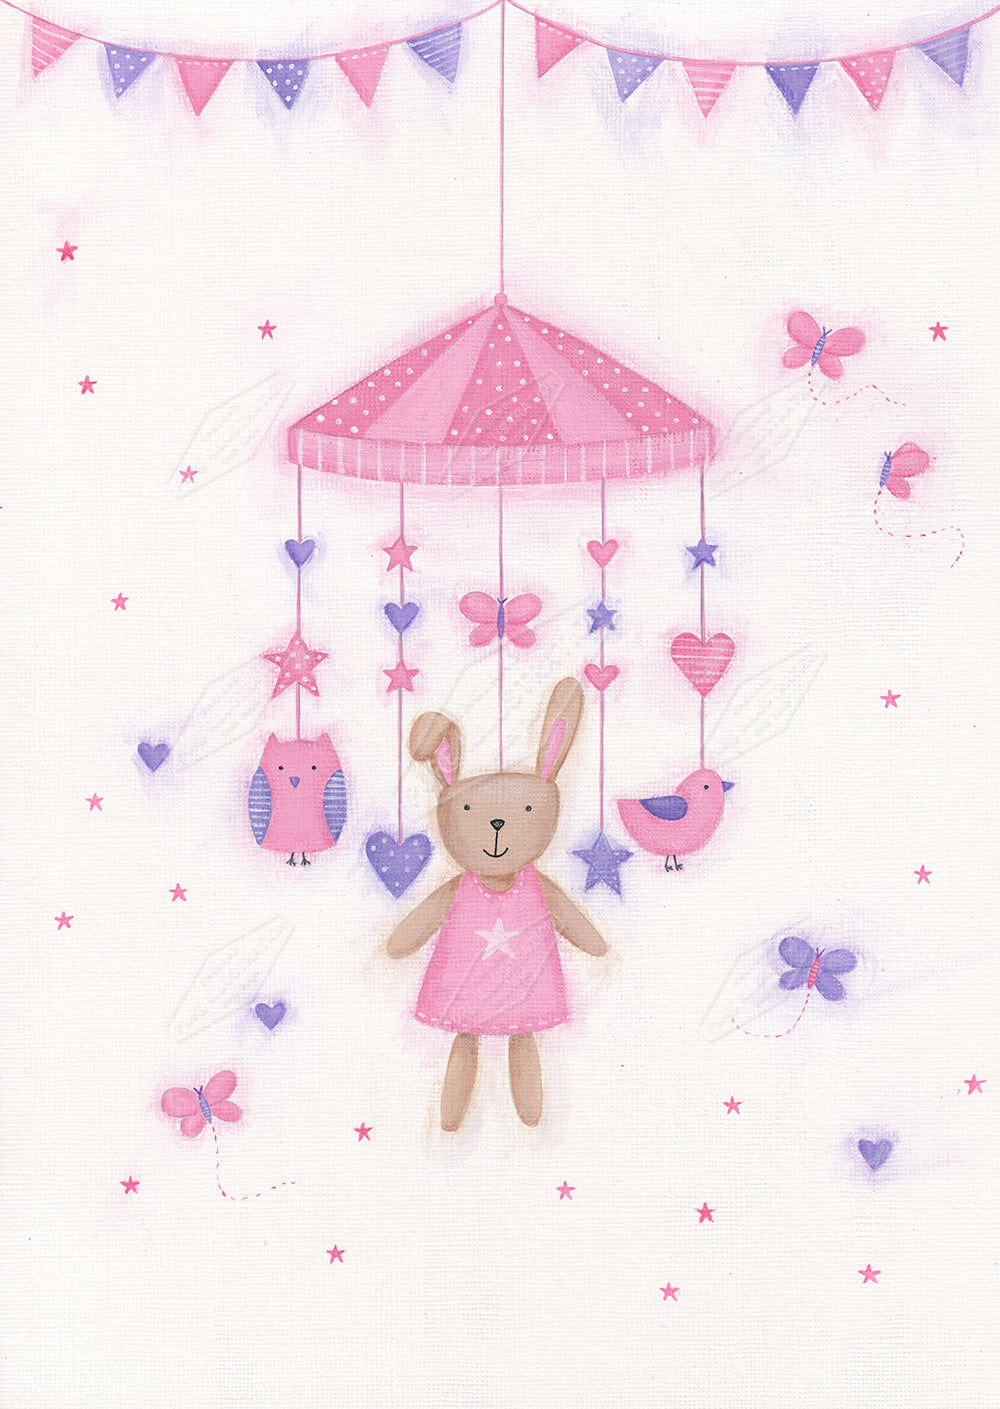 00028772AAI - Baby Mobile Illustration by Anna Aitken - Pure Art Licensing